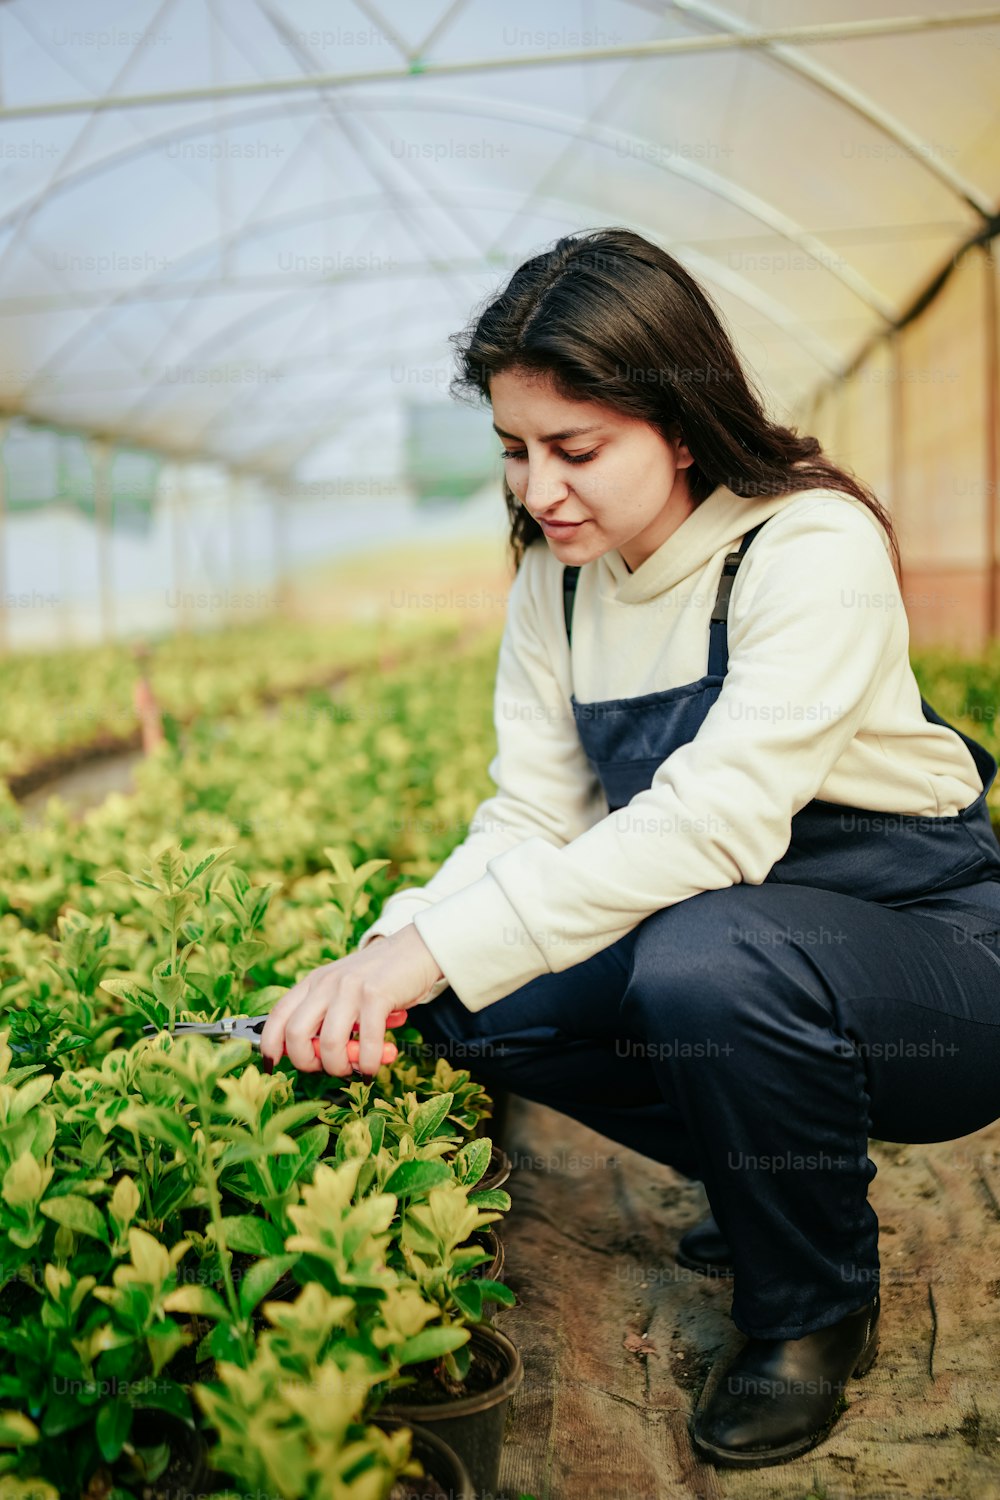 a woman kneeling down in a greenhouse cutting plants